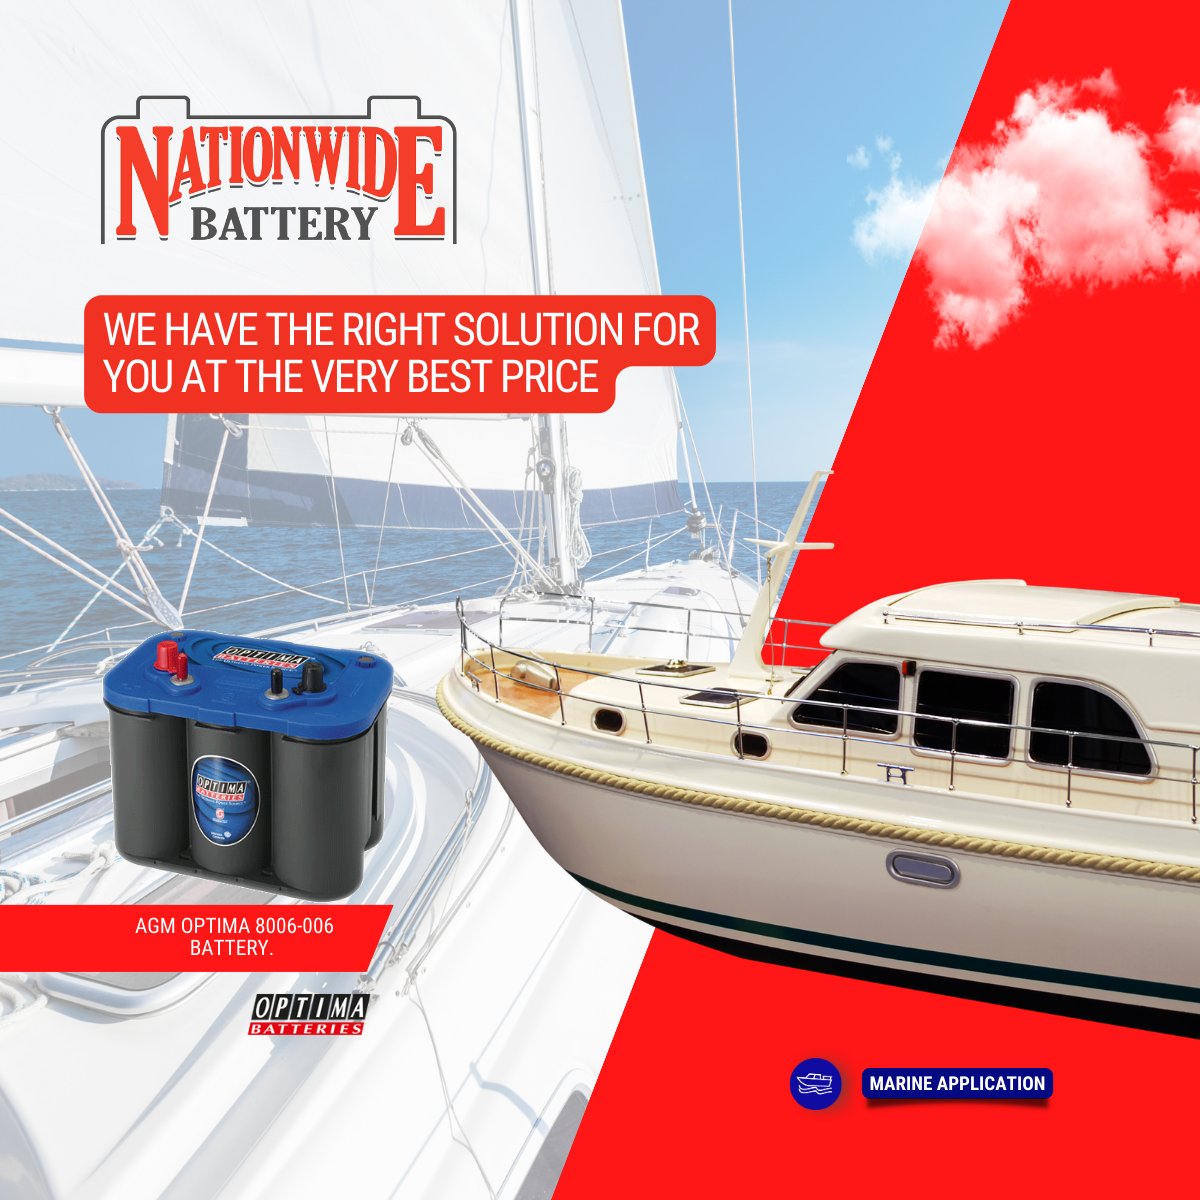 On top of providing outstanding vibration resistance, the #BLUETOP efficient power delivery and faster recharge time mean you’ll spend less time worrying about your #battery

⚠️Do you need an installation in the nick of time? Call us now! 📞 +1-954-527-4640.

#OPTIMABattery